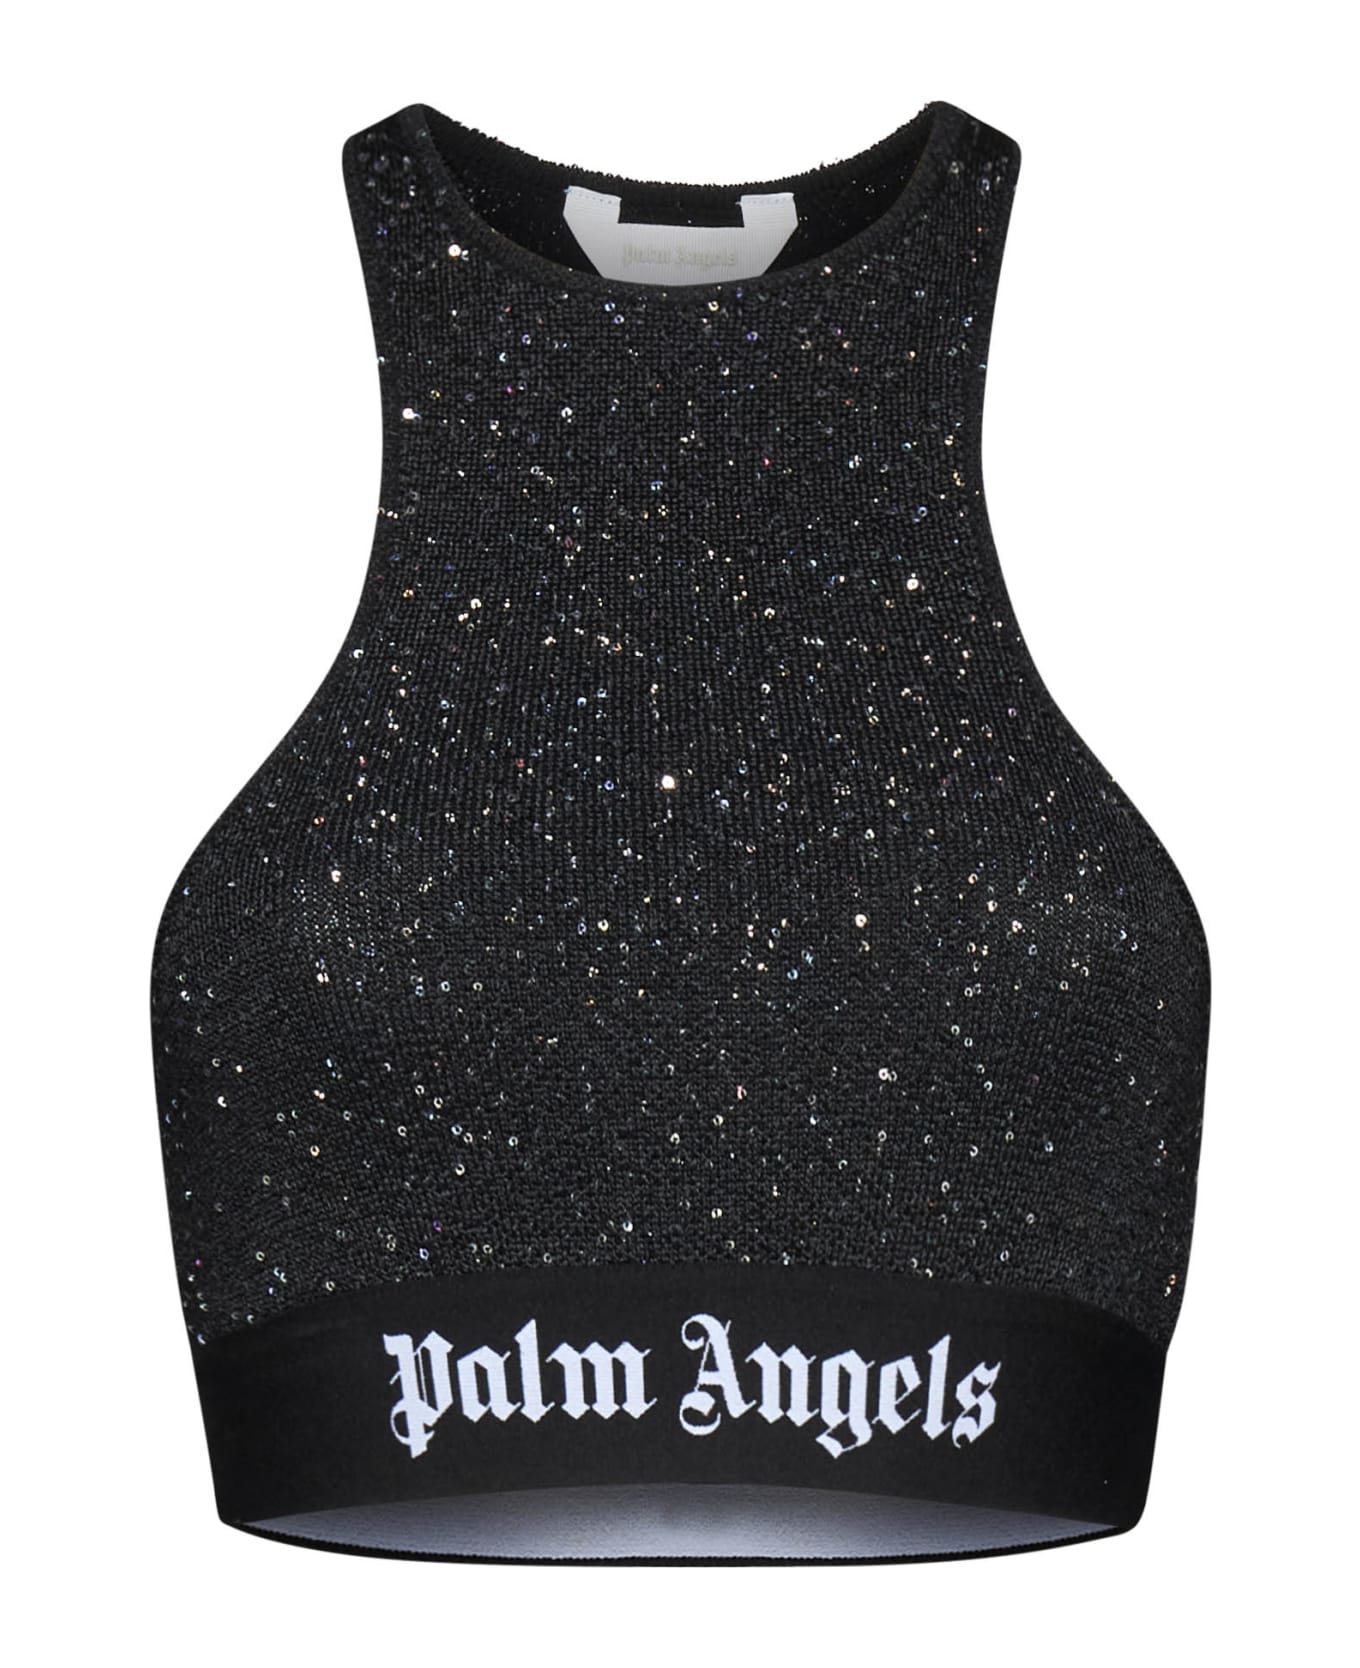 Palm Angels Soire Top In Black Viscose Blend - Black Whit